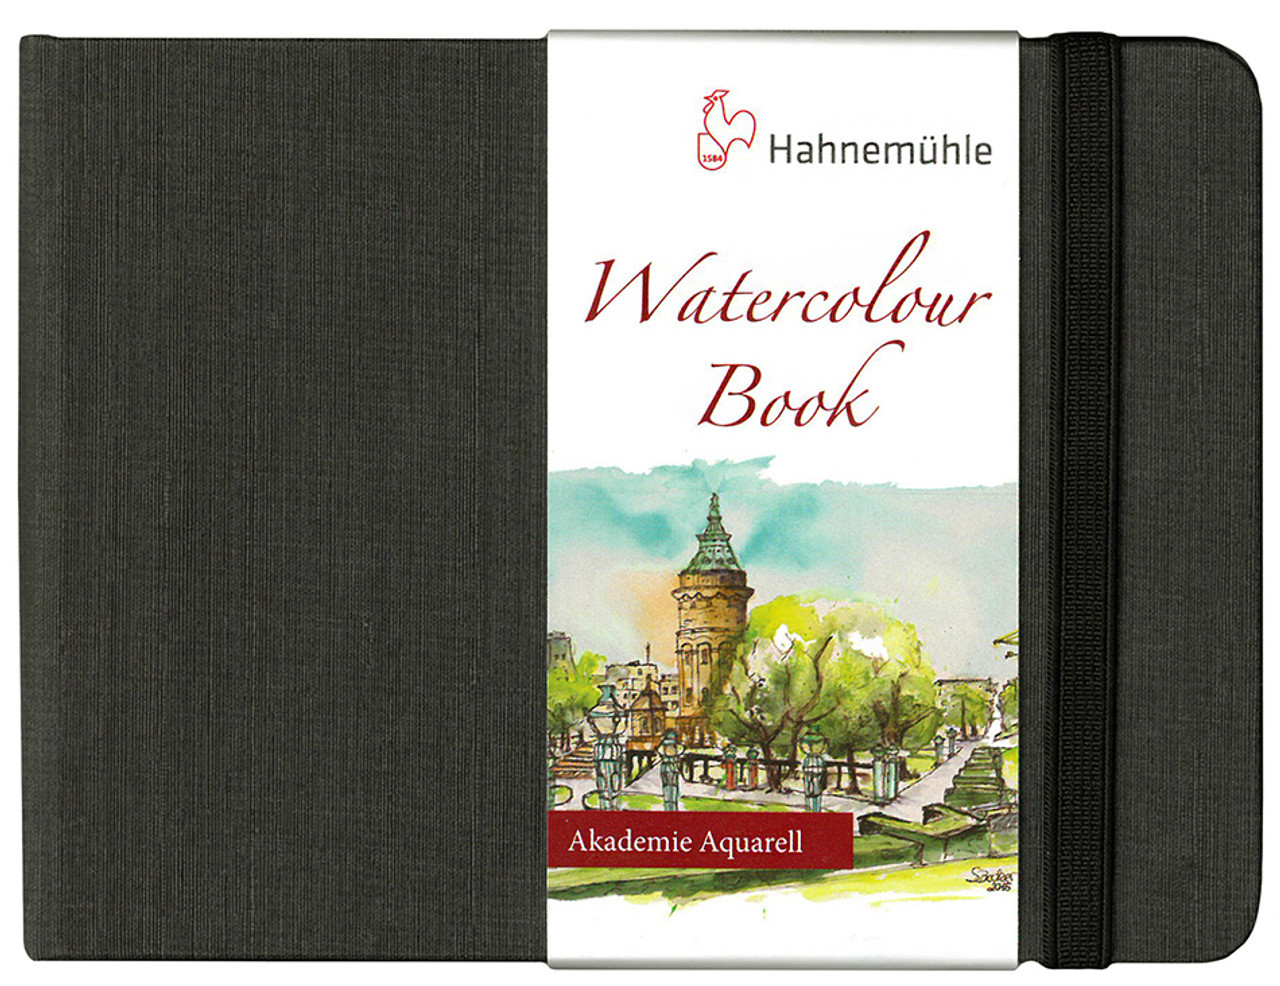 Hahnemuhle Watercolor Book- A4 Landscape (8.5 x 12)- 30 Sheets